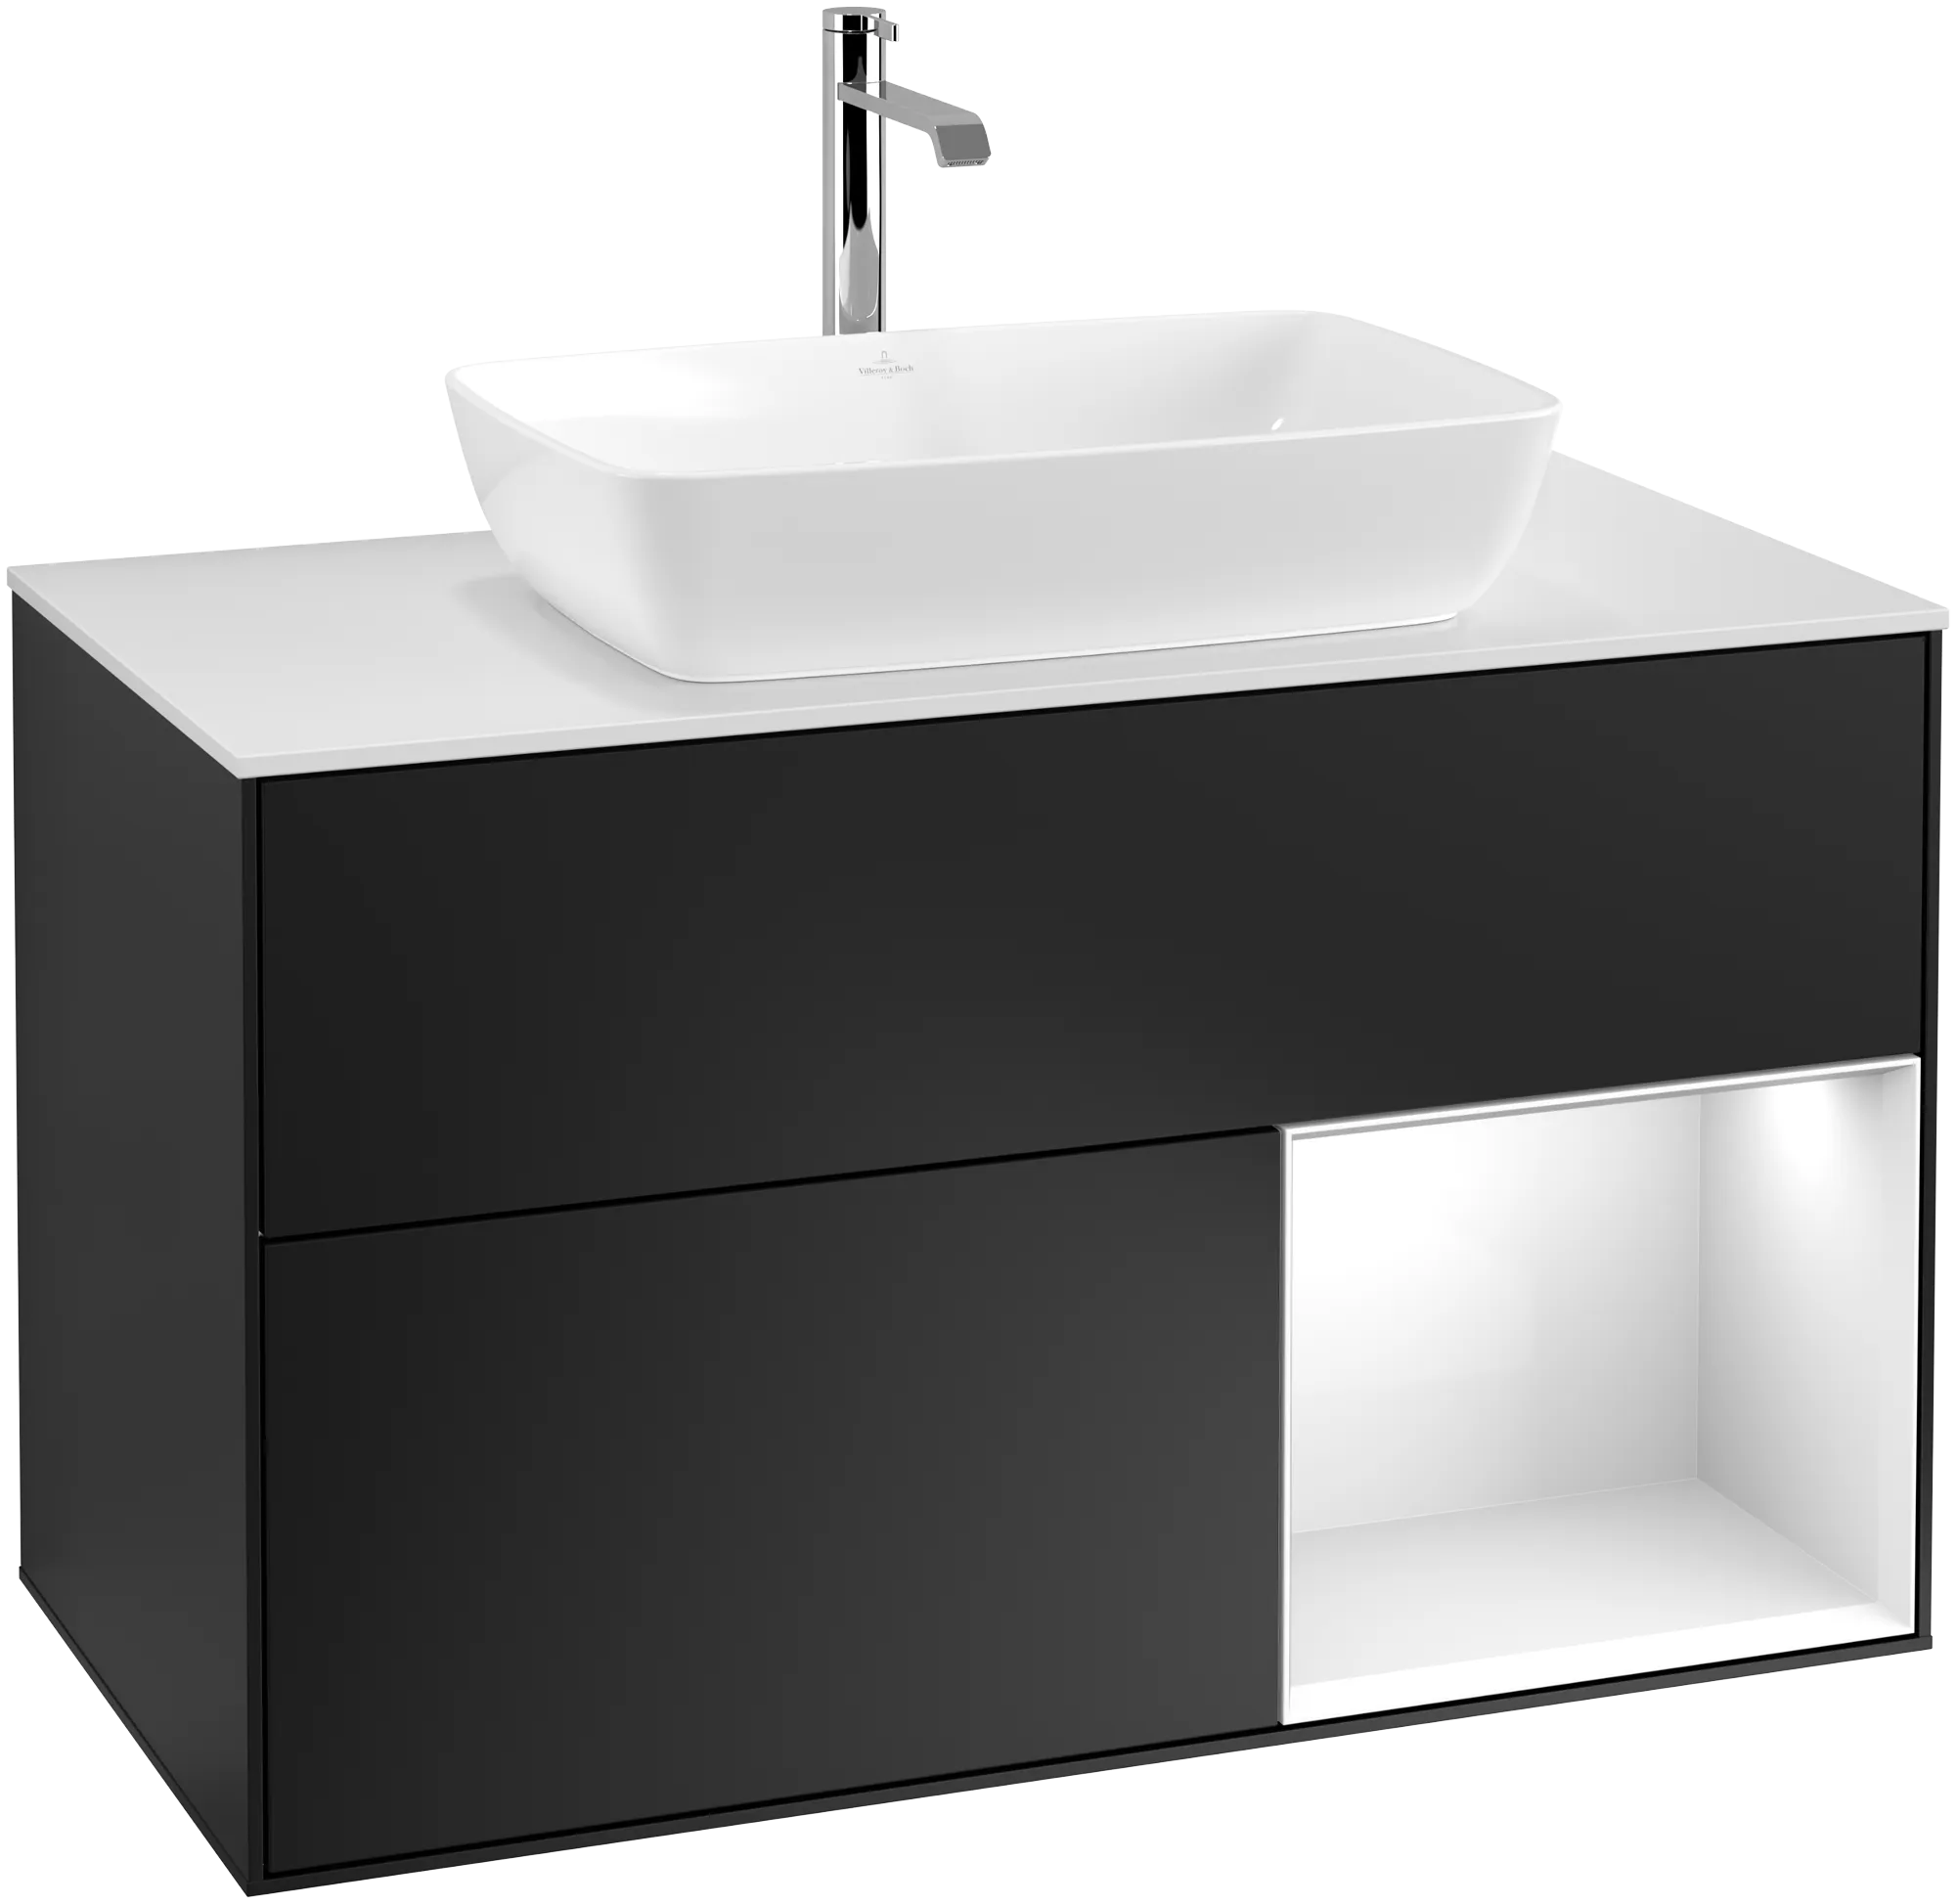 Picture of VILLEROY BOCH Finion Vanity unit, with lighting, 2 pull-out compartments, 1000 x 603 x 501 mm, Black Matt Lacquer / Glossy White Lacquer / Glass White Matt #G781GFPD